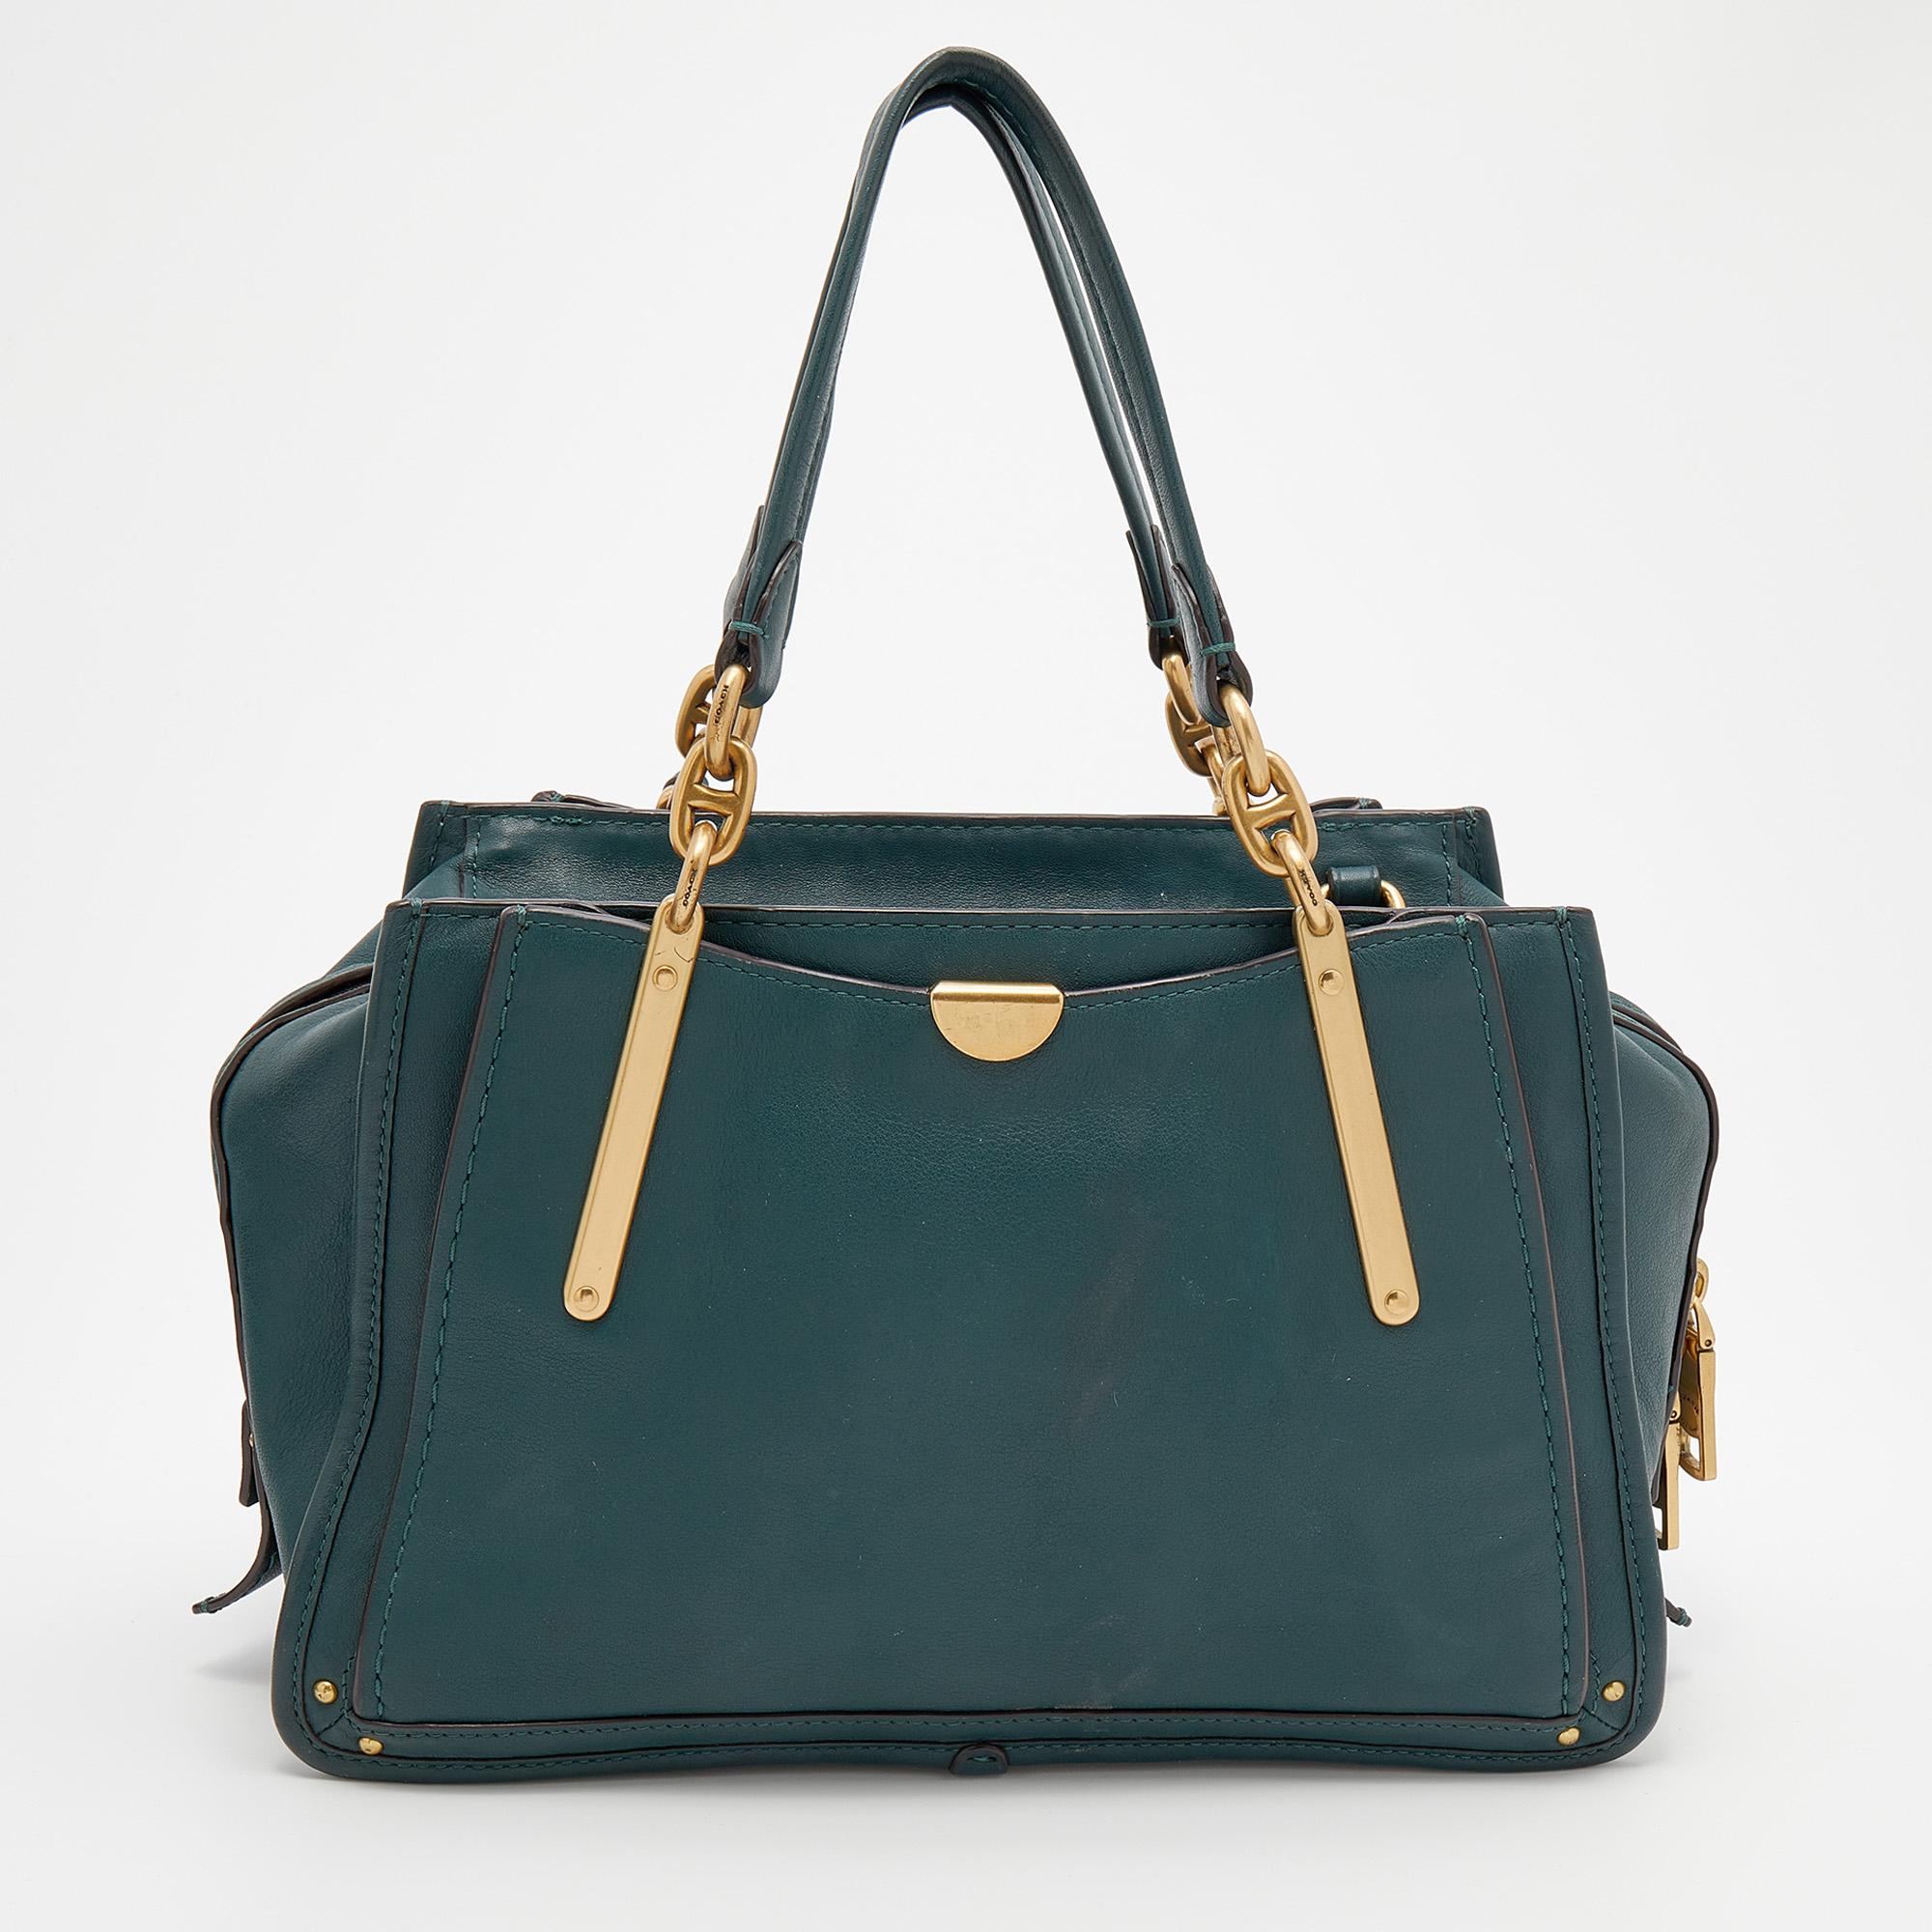 Stylish and easy to carry, this designer leather satchel will be a fine choice for work or after. Lined with nylon, this pre-owned Coach bag can easily fit in all your essentials. It can be held in your arm, hand, or shoulder.

Includes: Shoulder